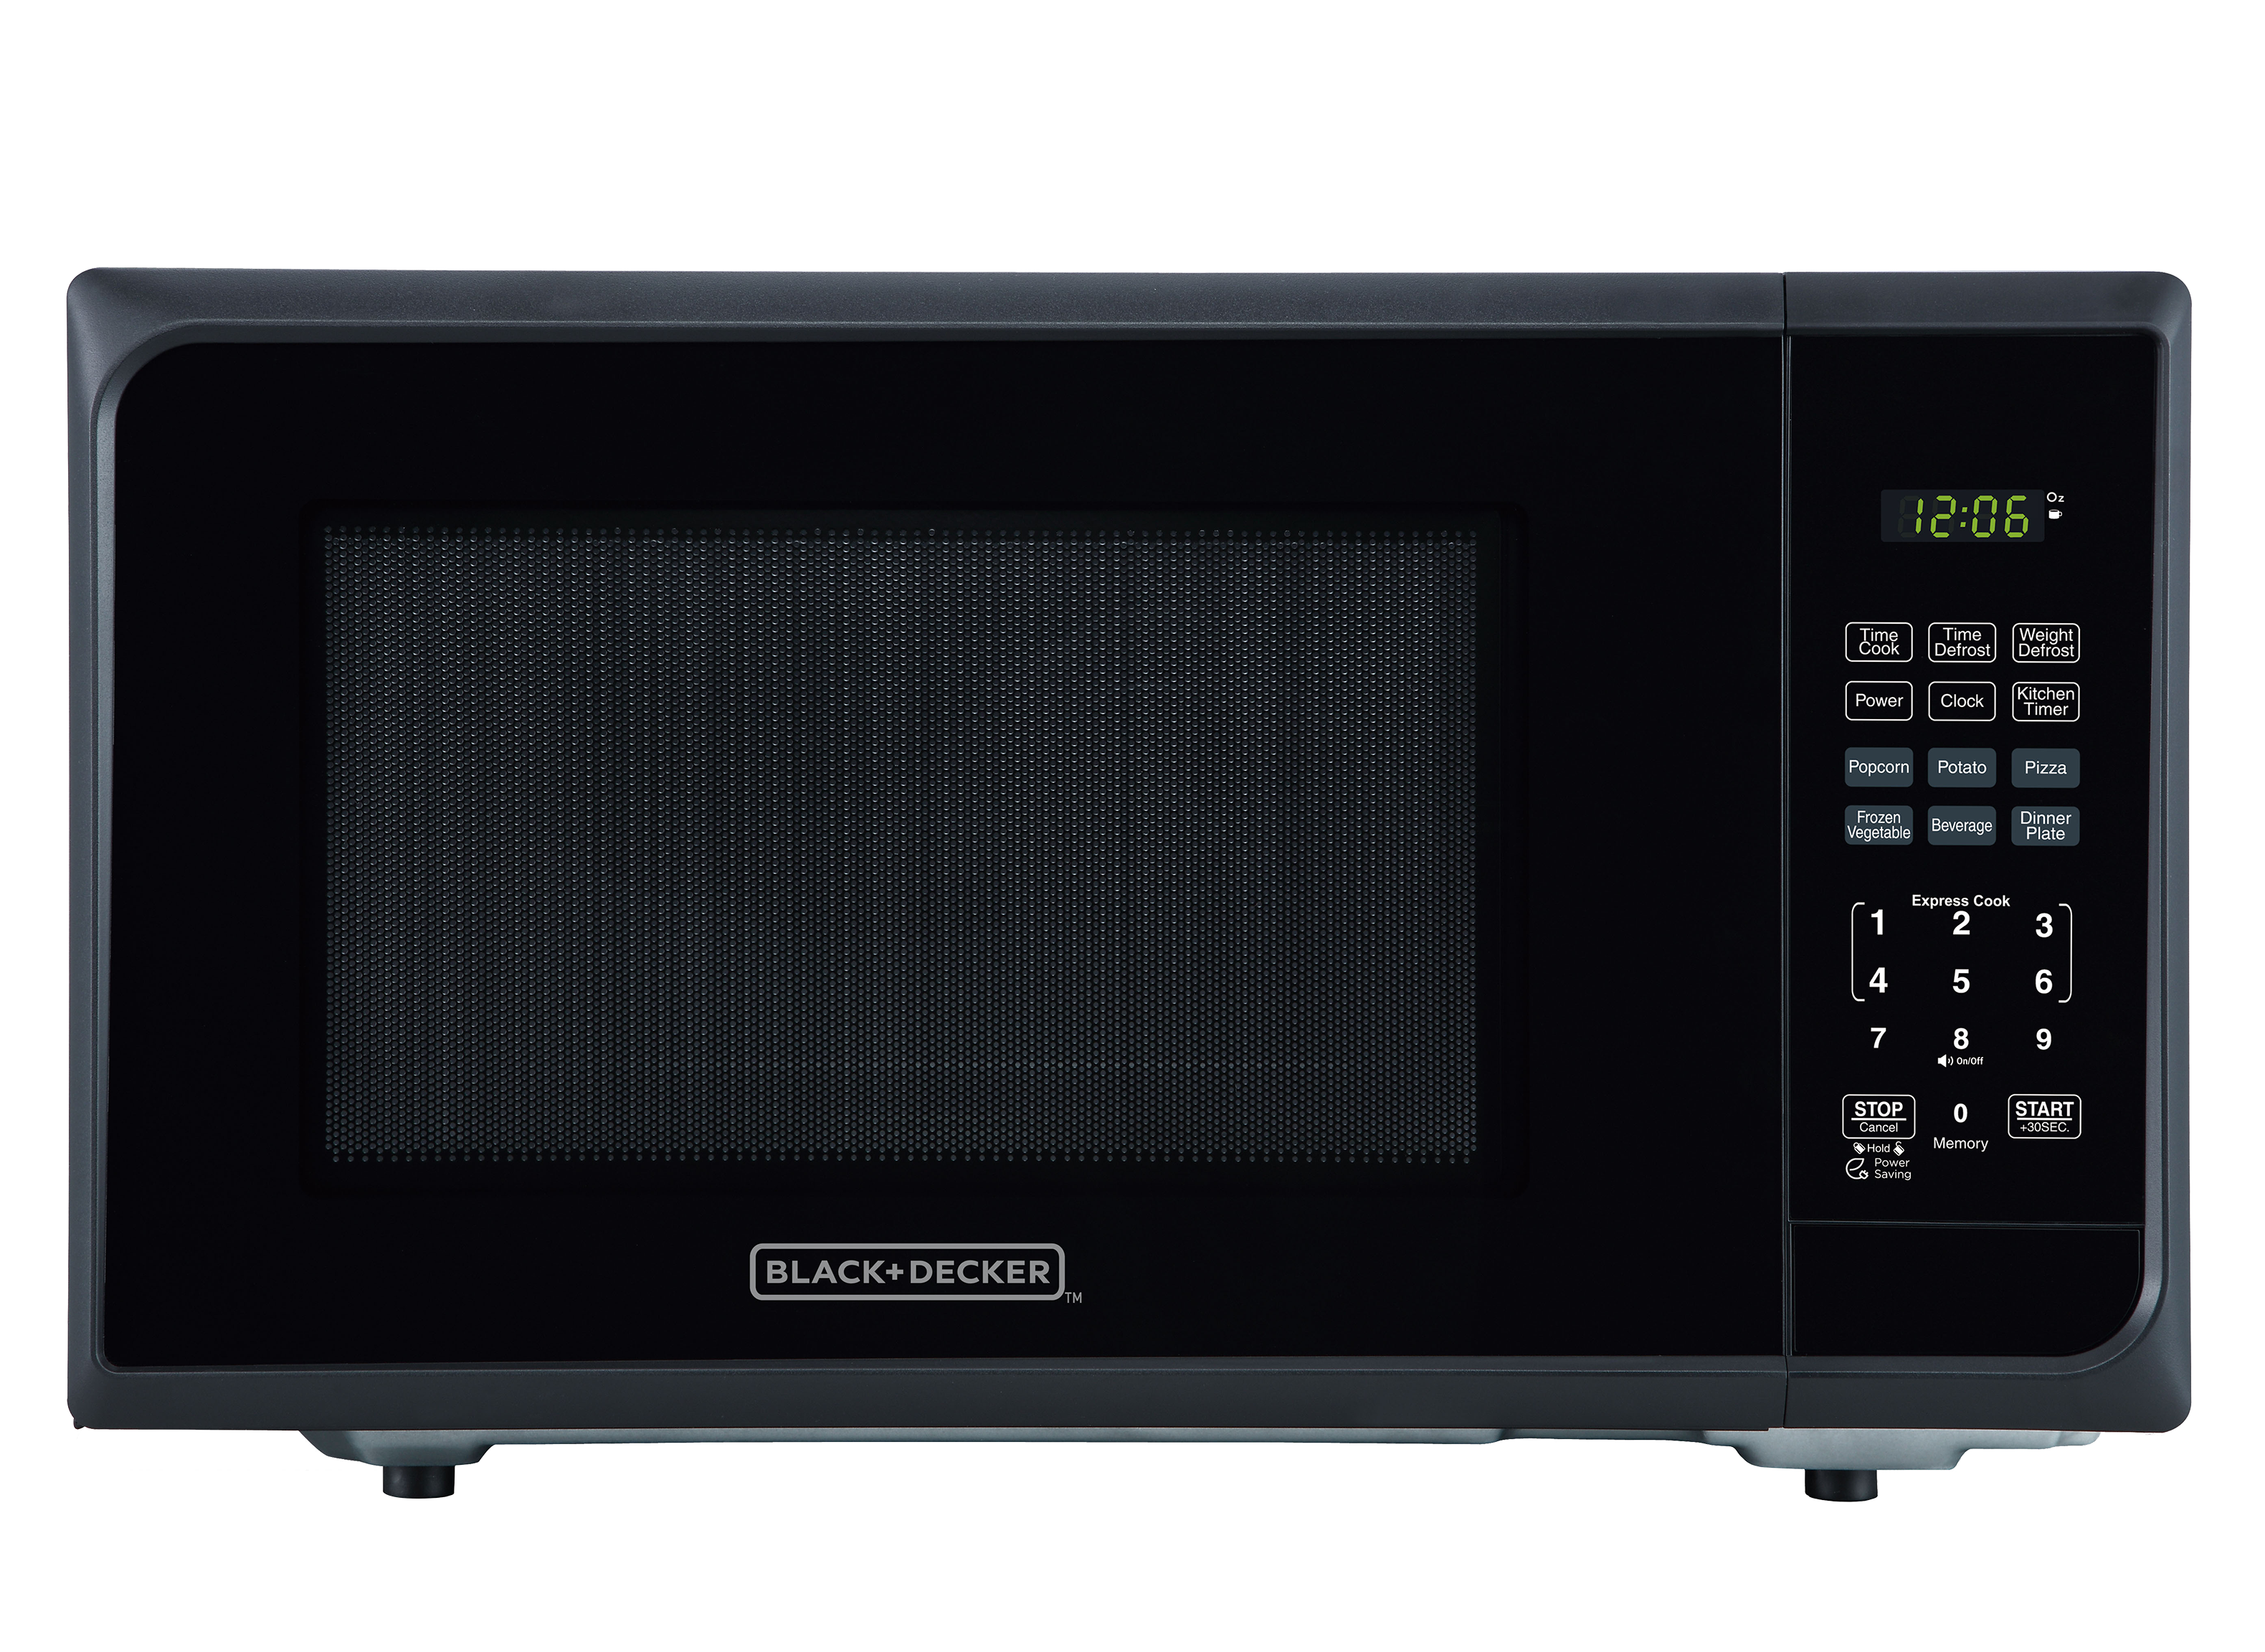 Black+decker Em031mb11 Digital Microwave Oven with Turntable Push-Button Door, Child Safety Lock, 1000W, 1.1cu.ft, Black & Stainless Steel, 1.1 Cu.